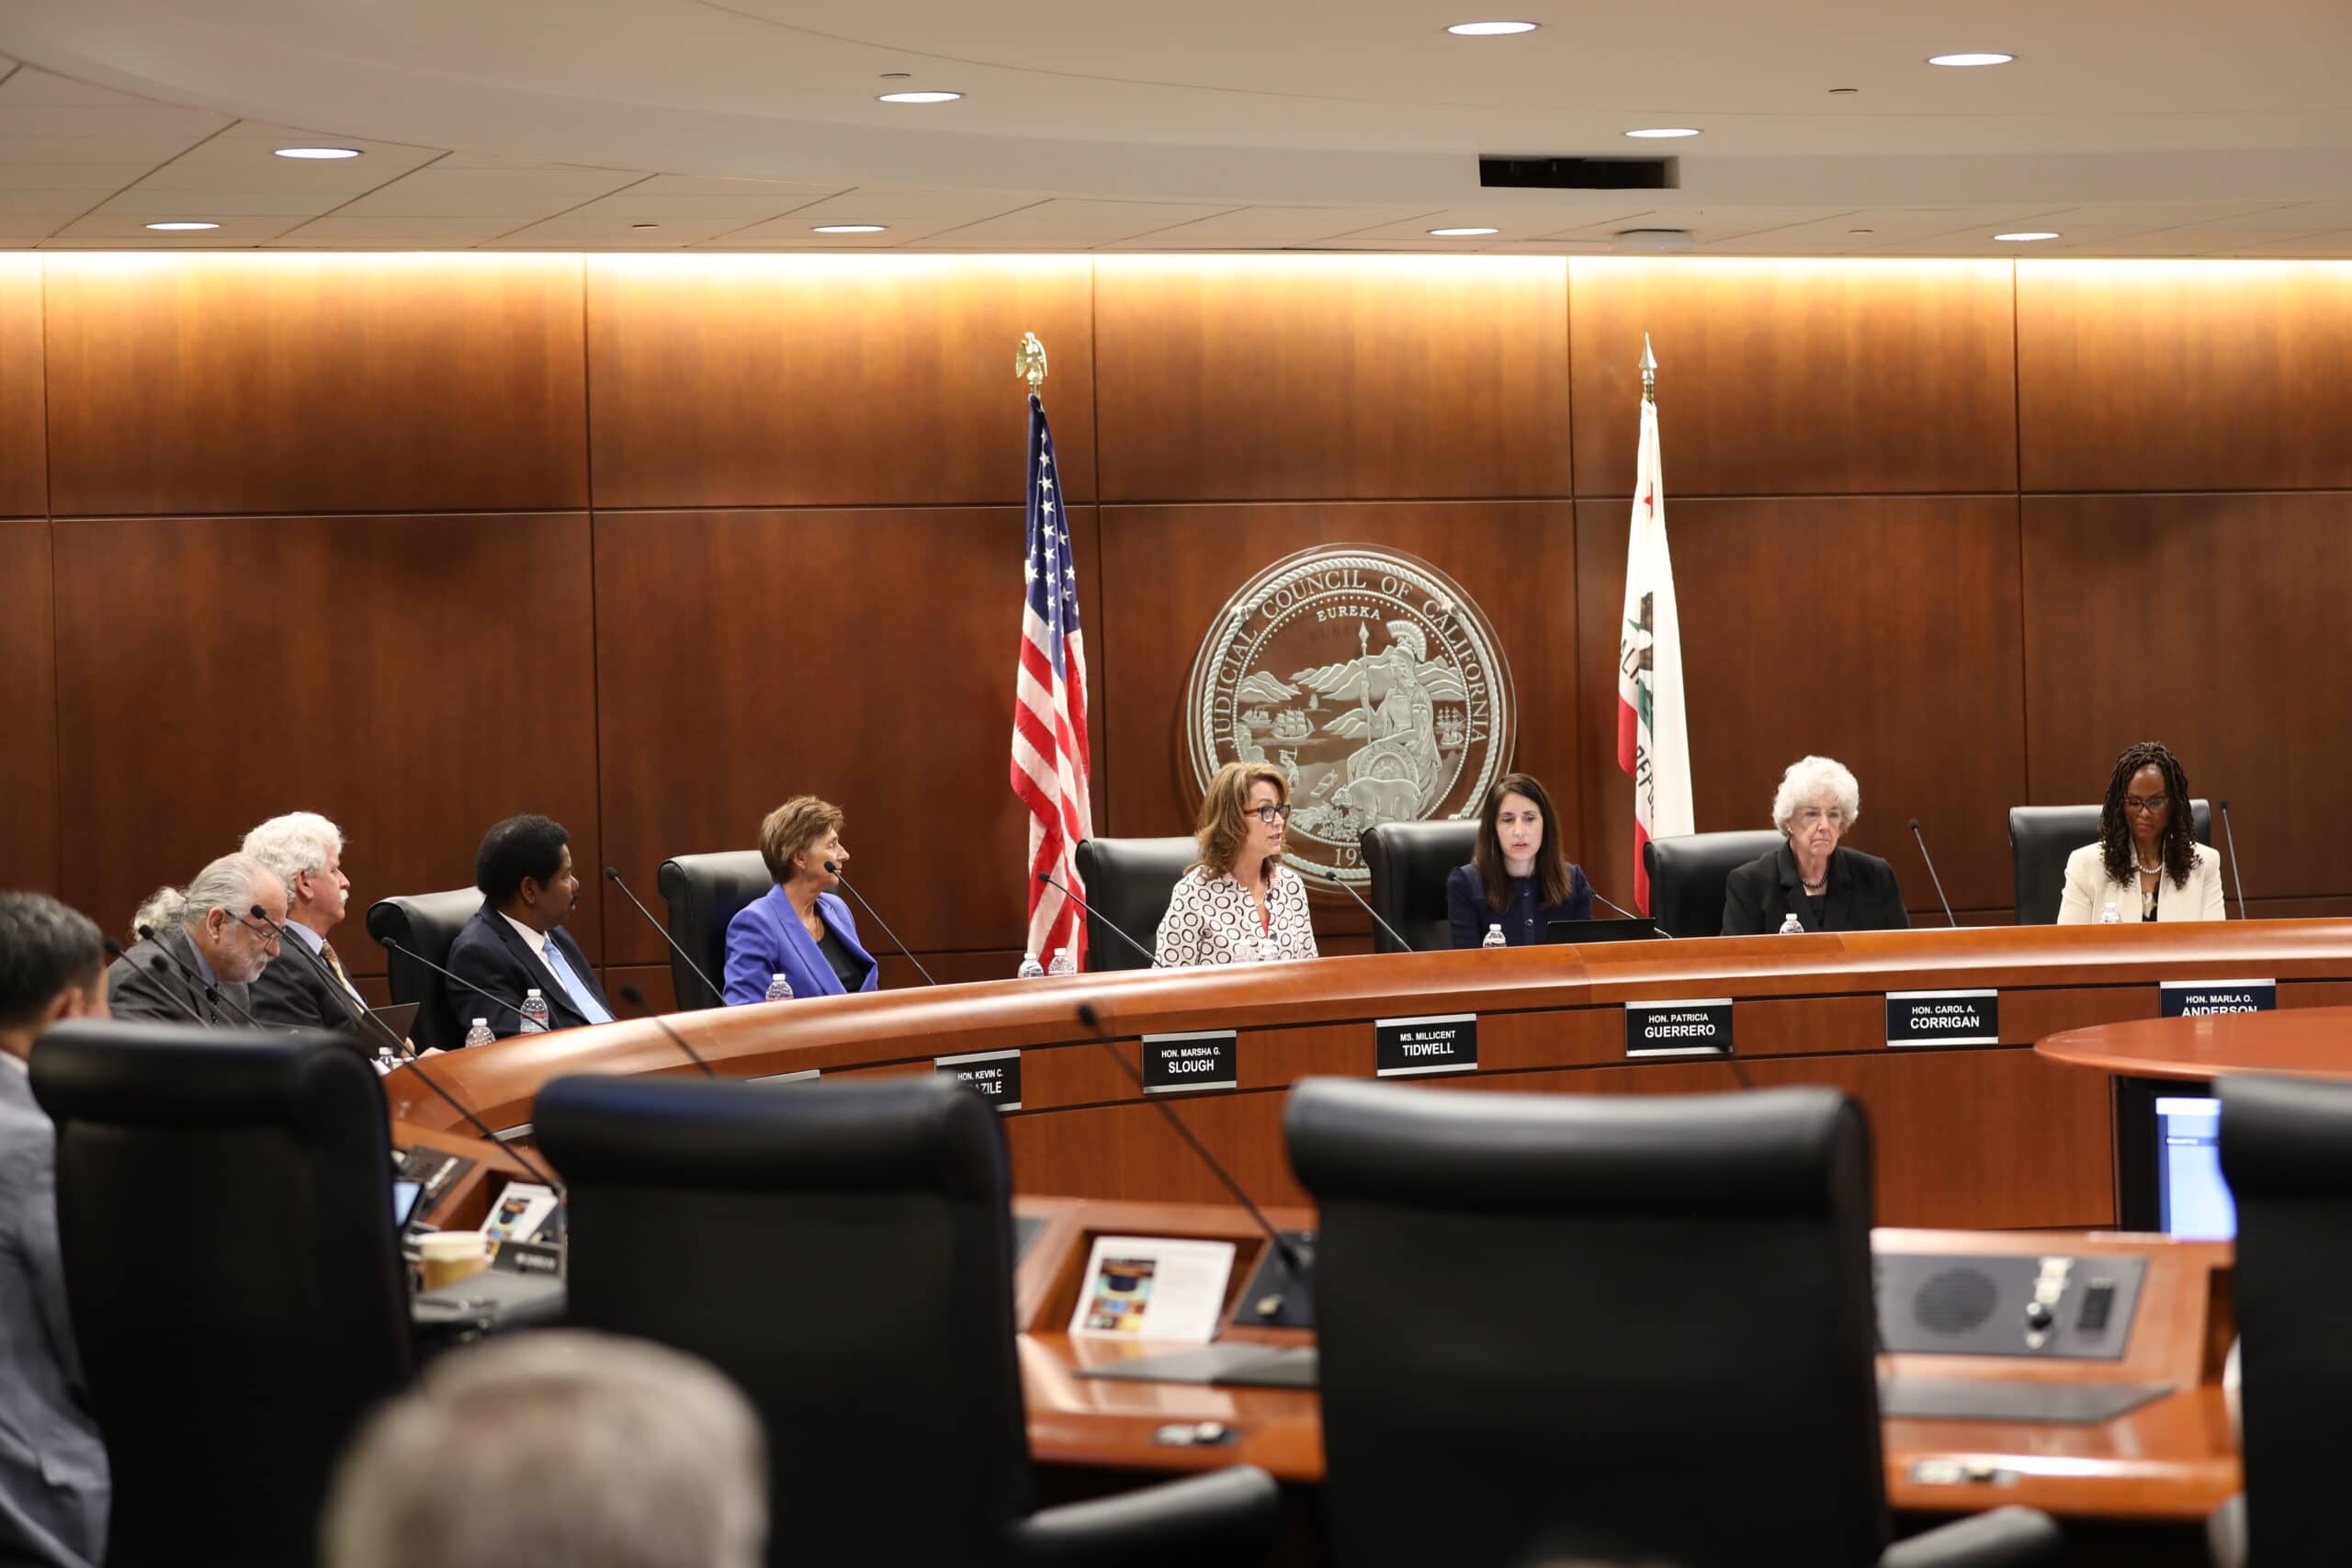 Court vacancies, funding, pretrial diversion outlined in Judicial Council meeting